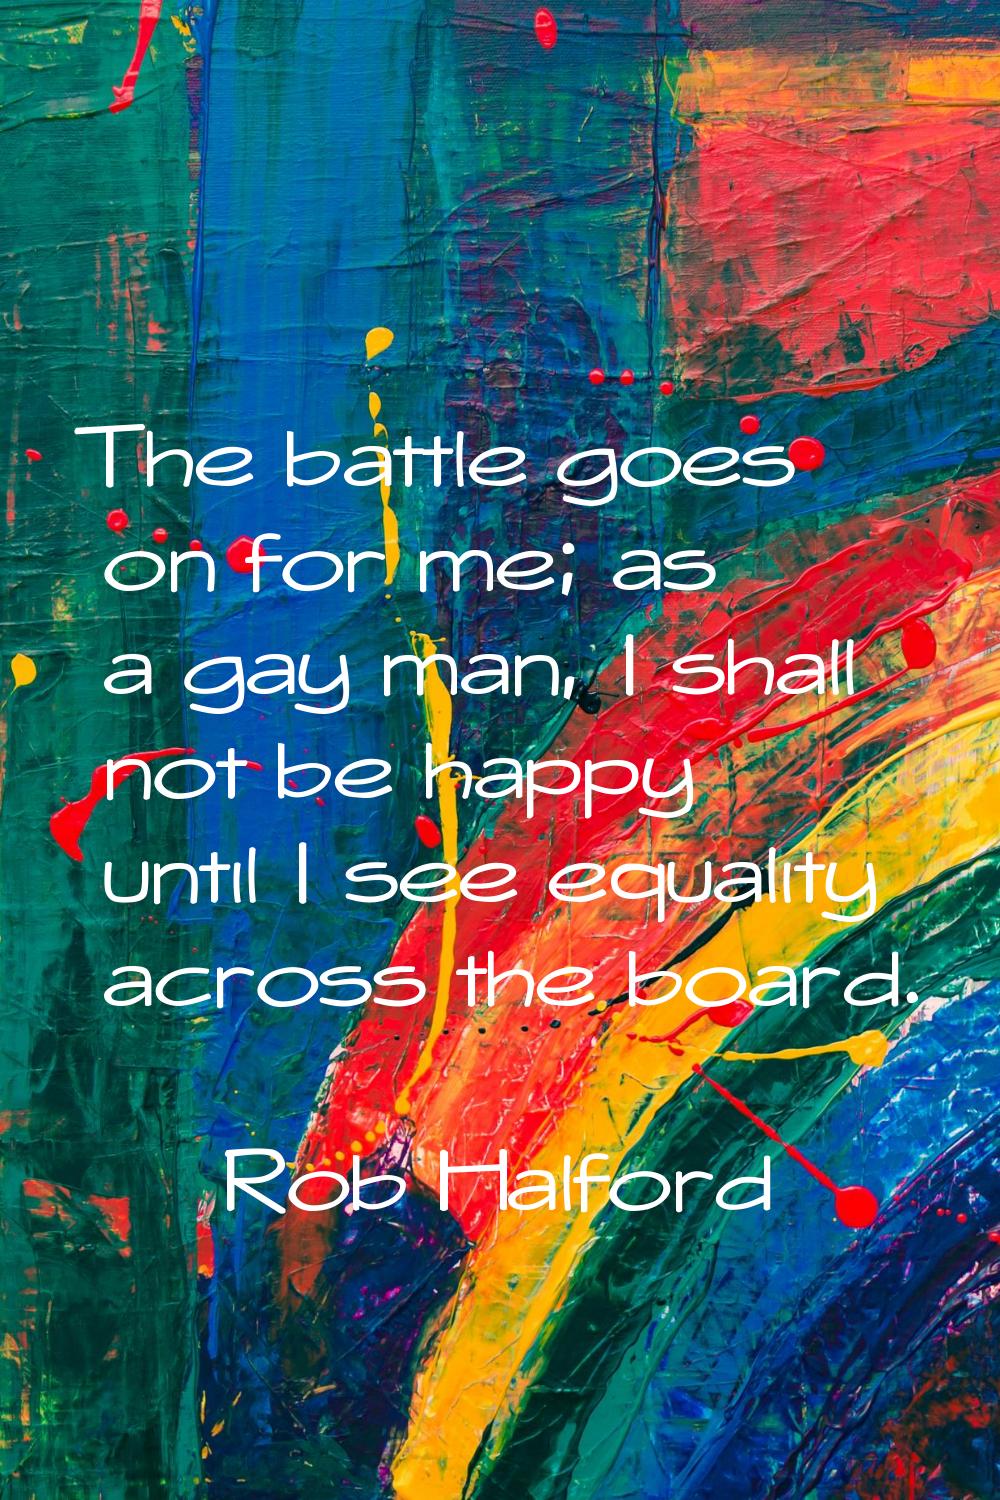 The battle goes on for me; as a gay man, I shall not be happy until I see equality across the board